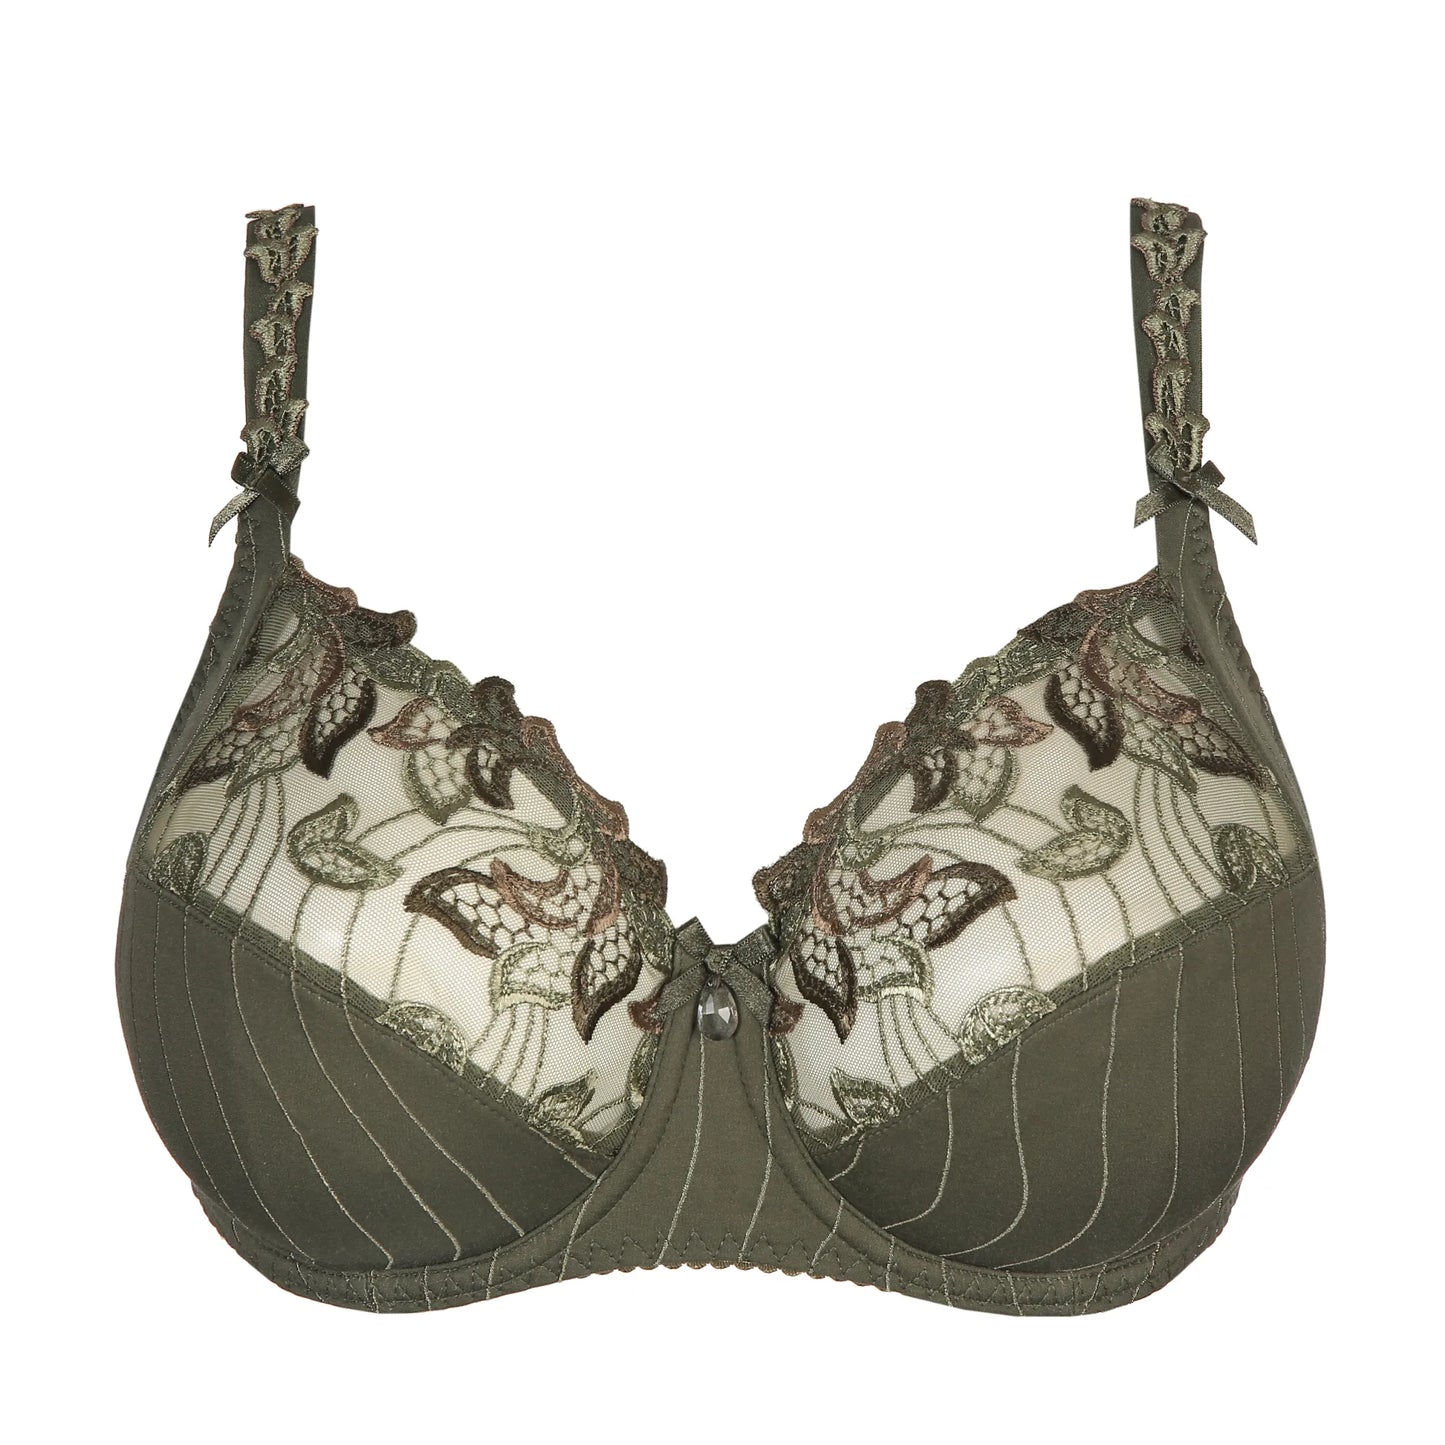 Deauville Full Cup Non-Padded Bra - Paradise Green